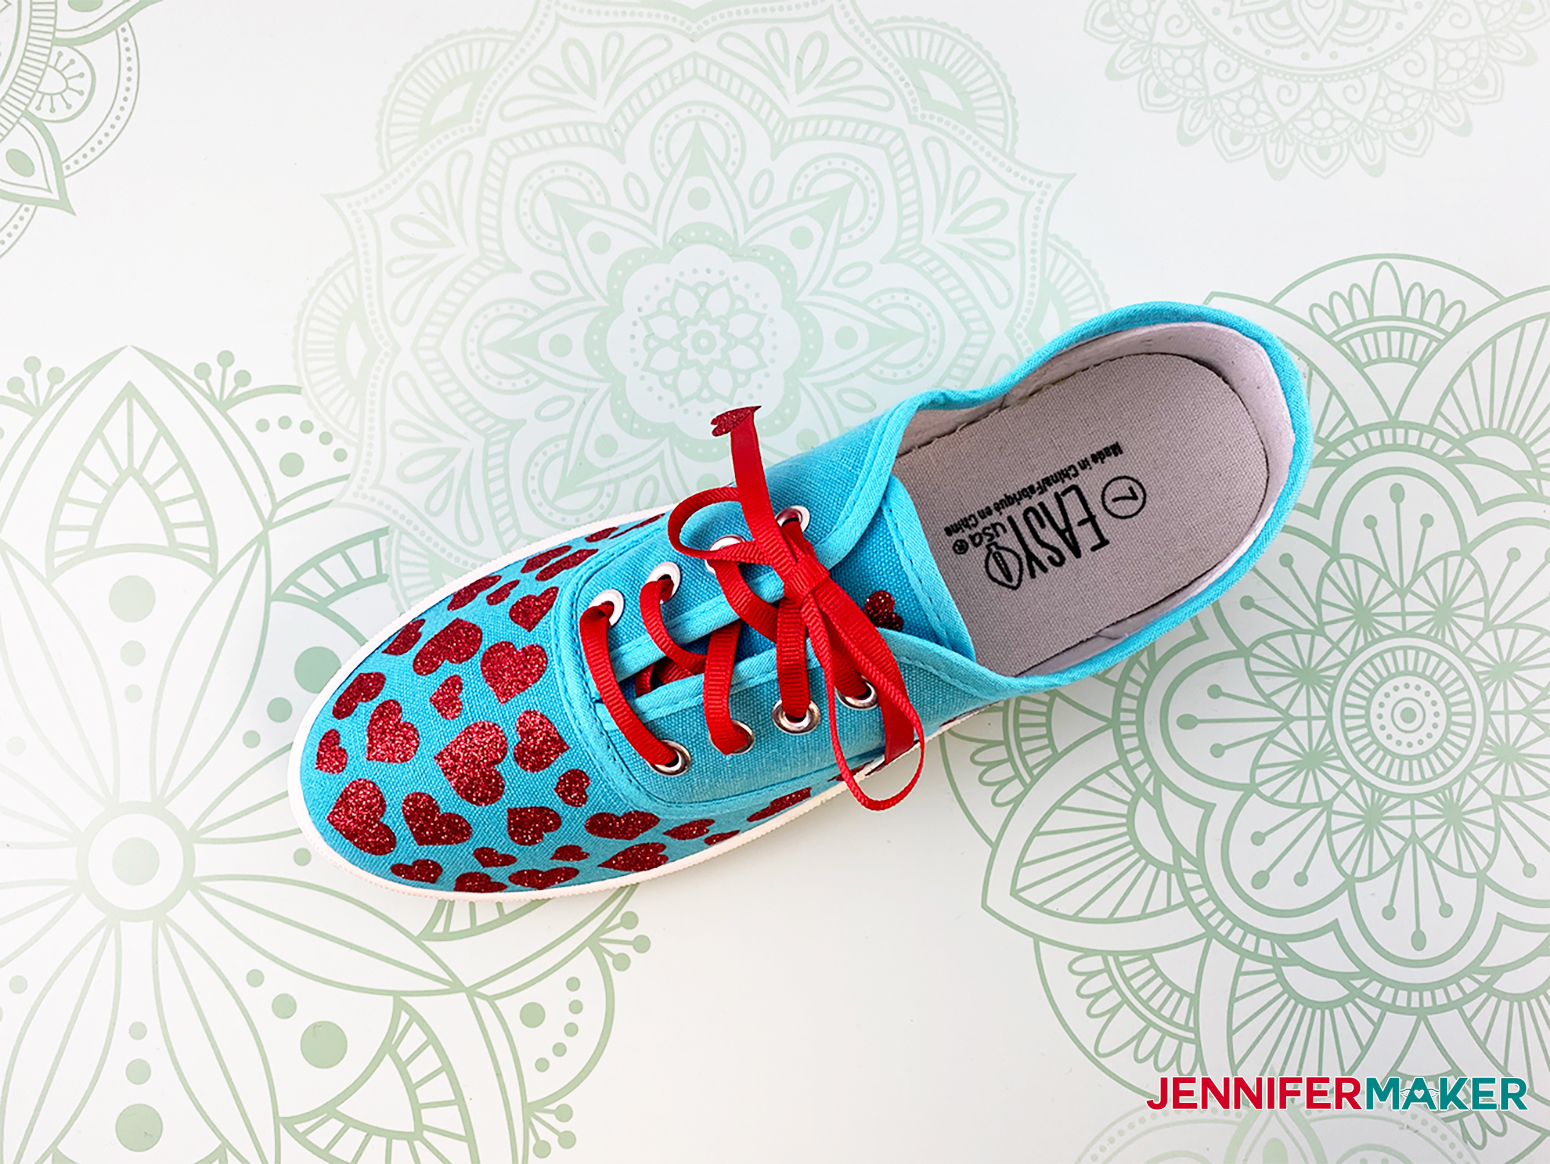 HOW TO MAKE STENCILS FOR YOUR SHOES 